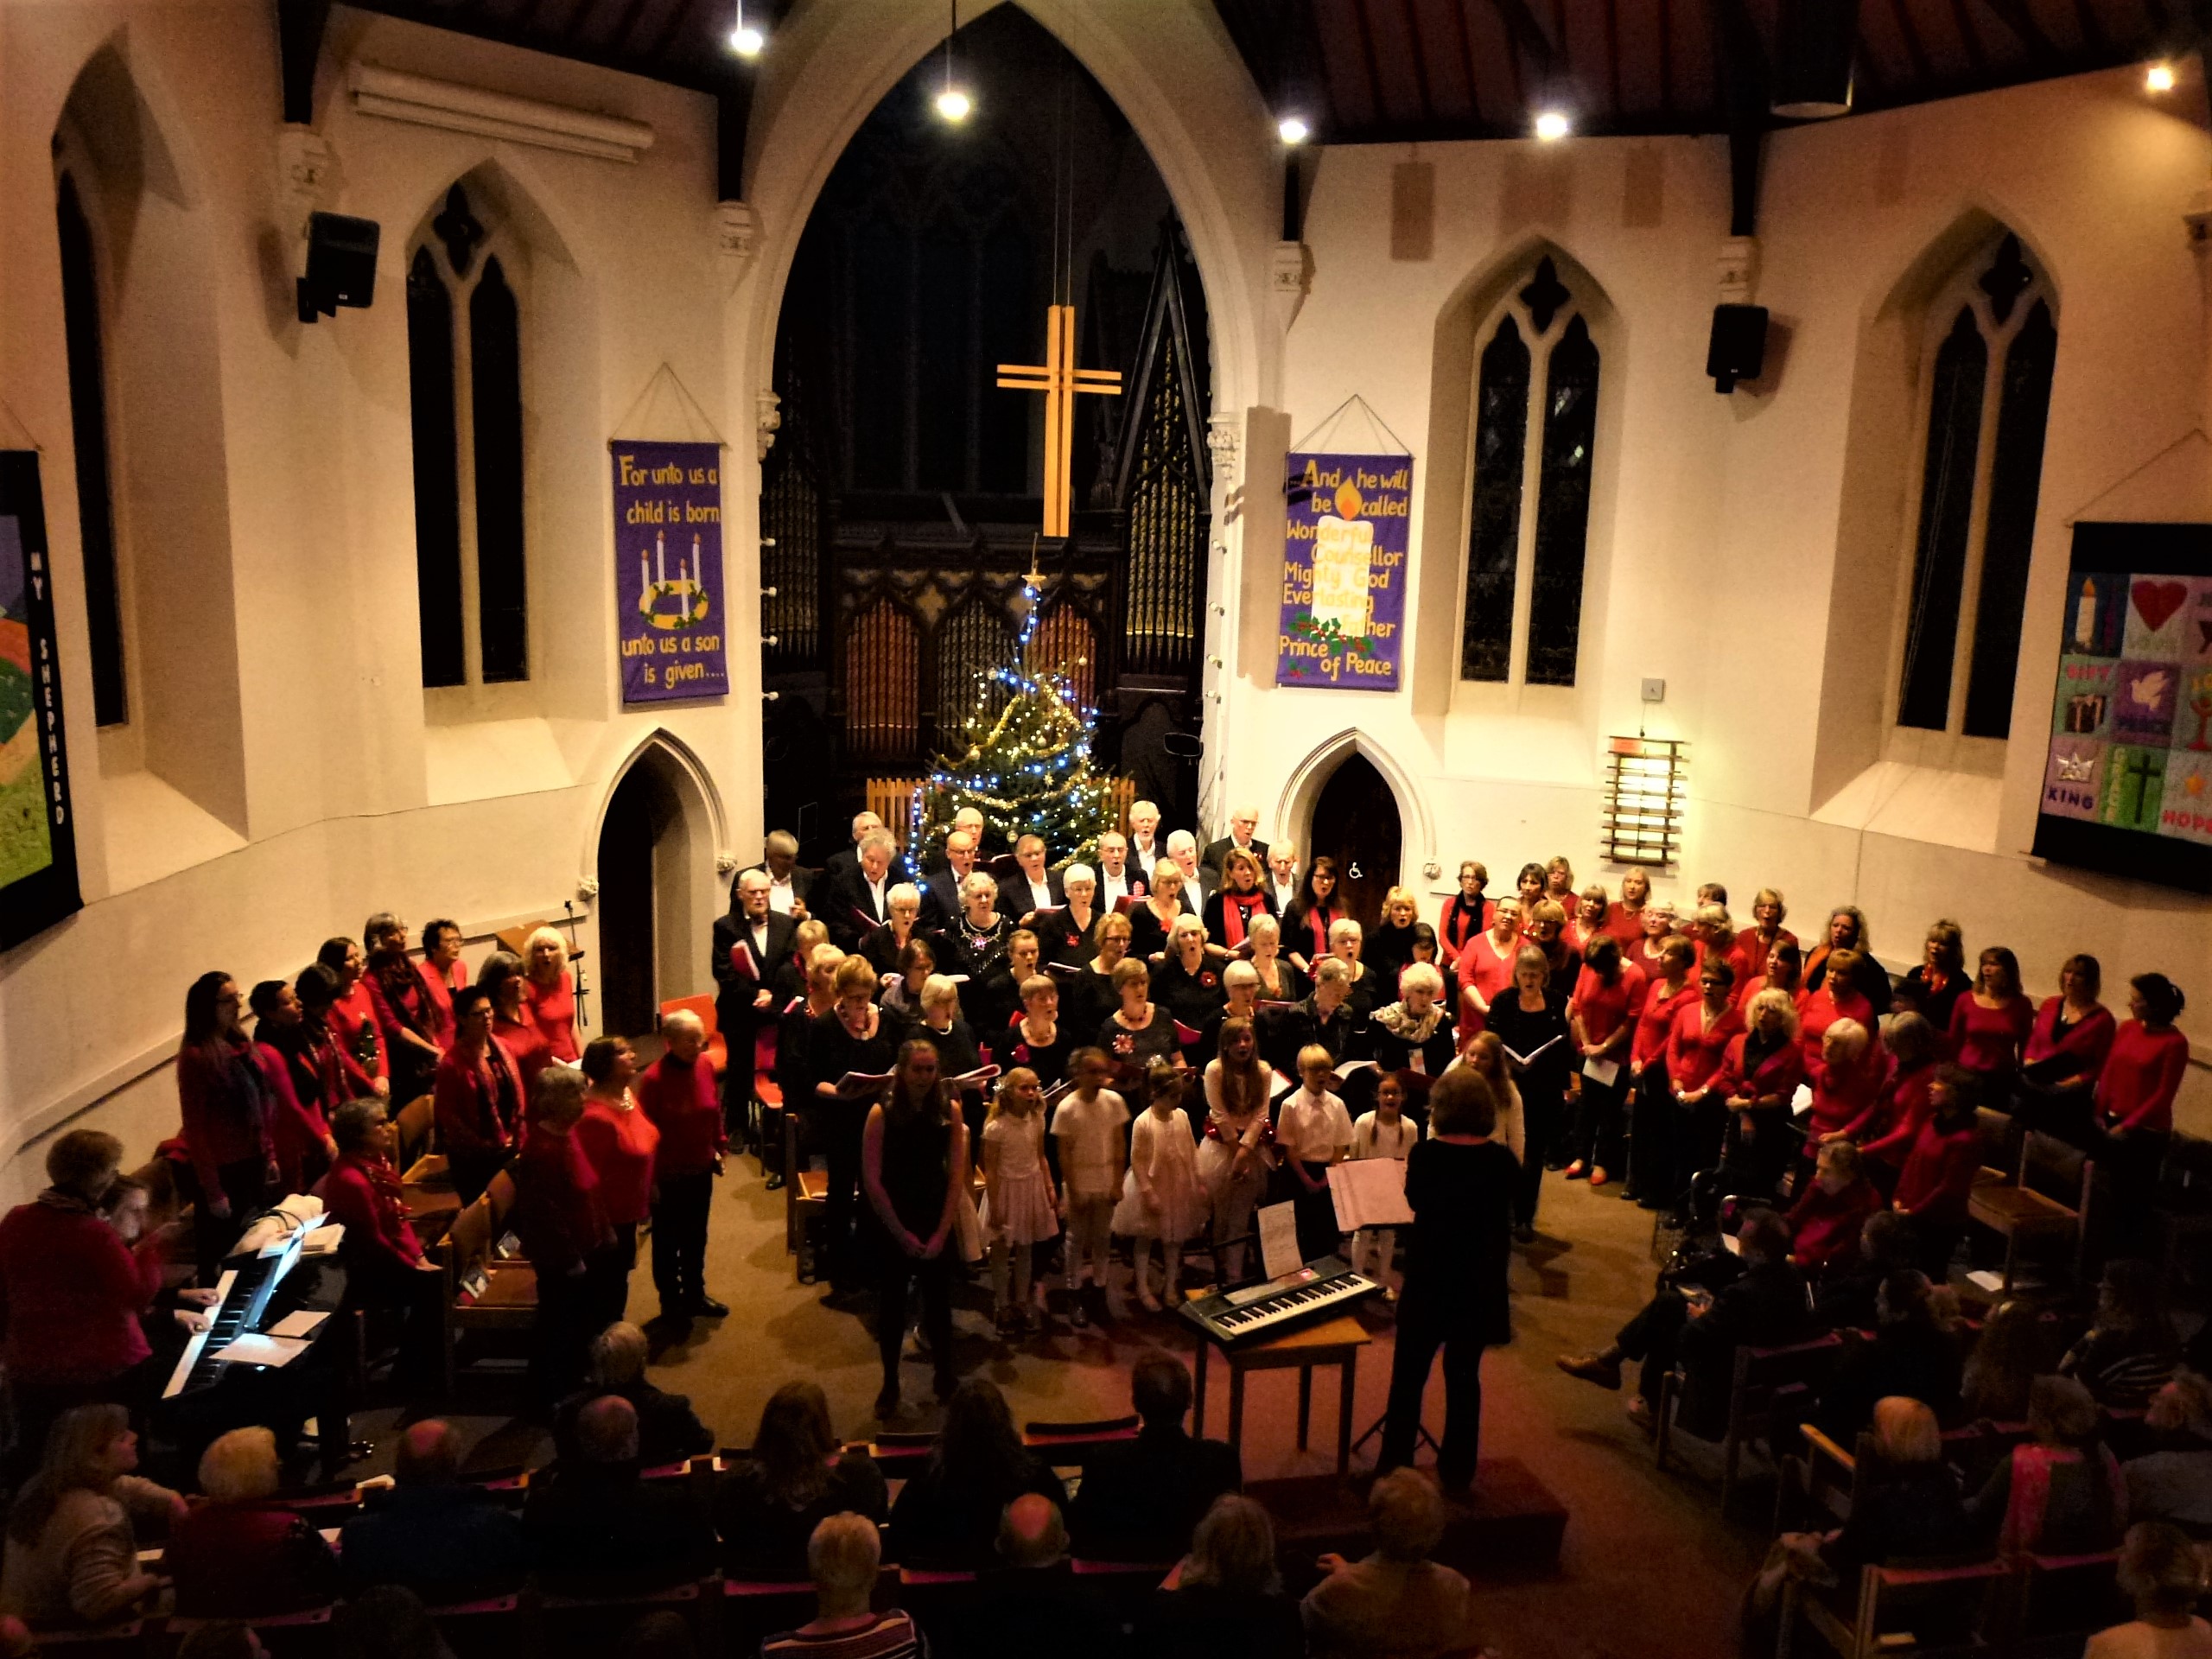 Viva!, Heart & Soul and Skylarks sing in the Christmas Concert at the United Church, 2017